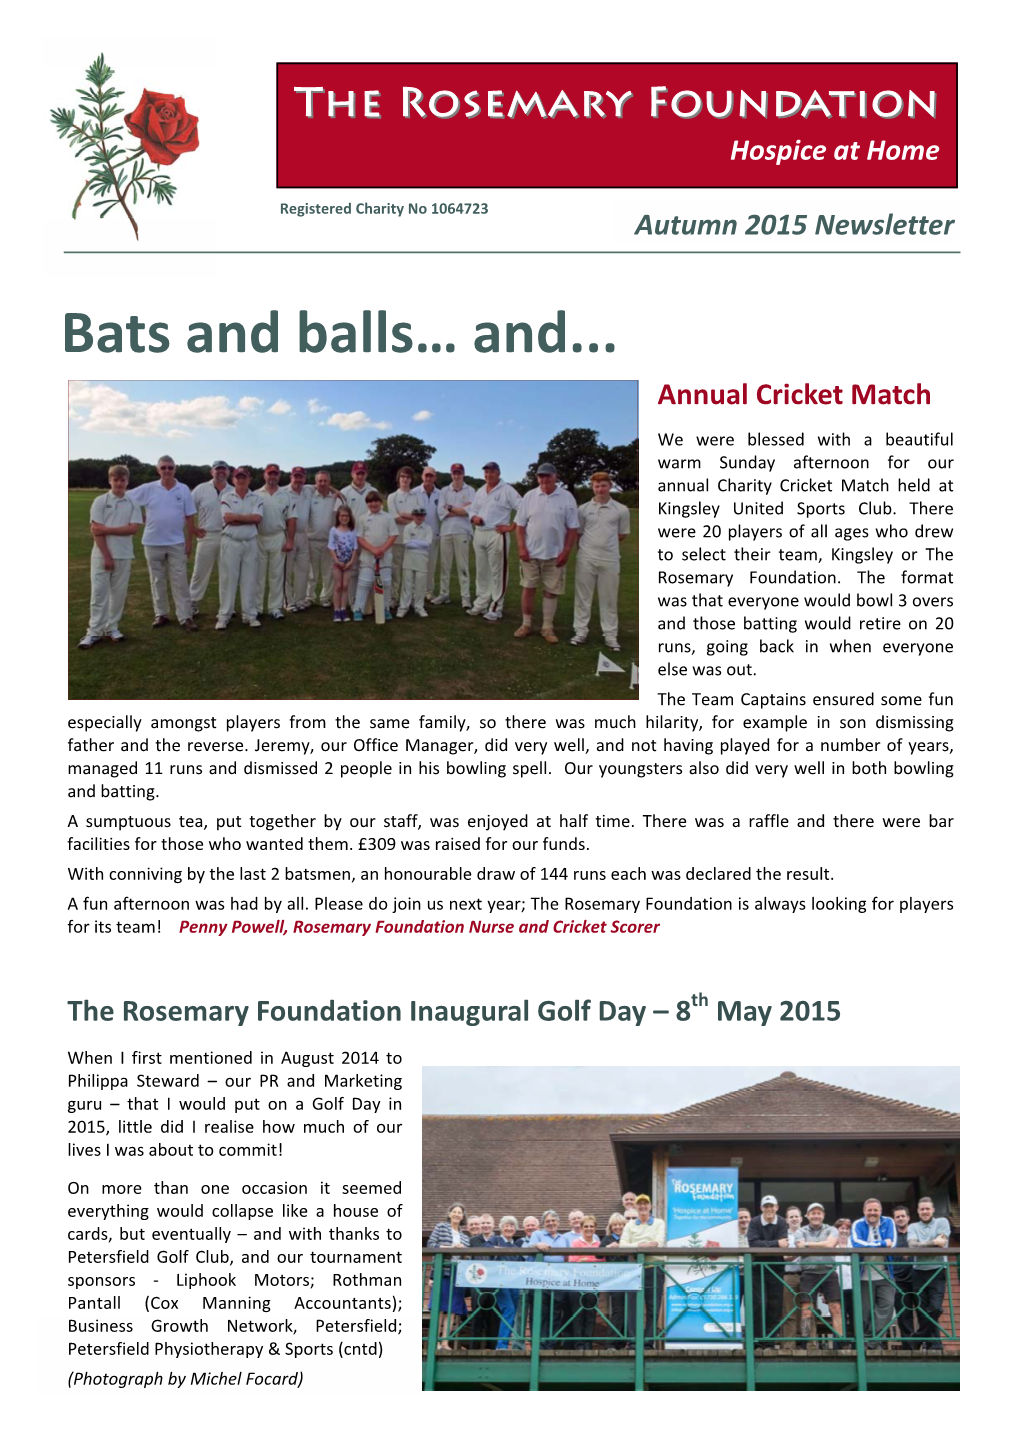 Bats and Balls… And... Annual Cricket Match